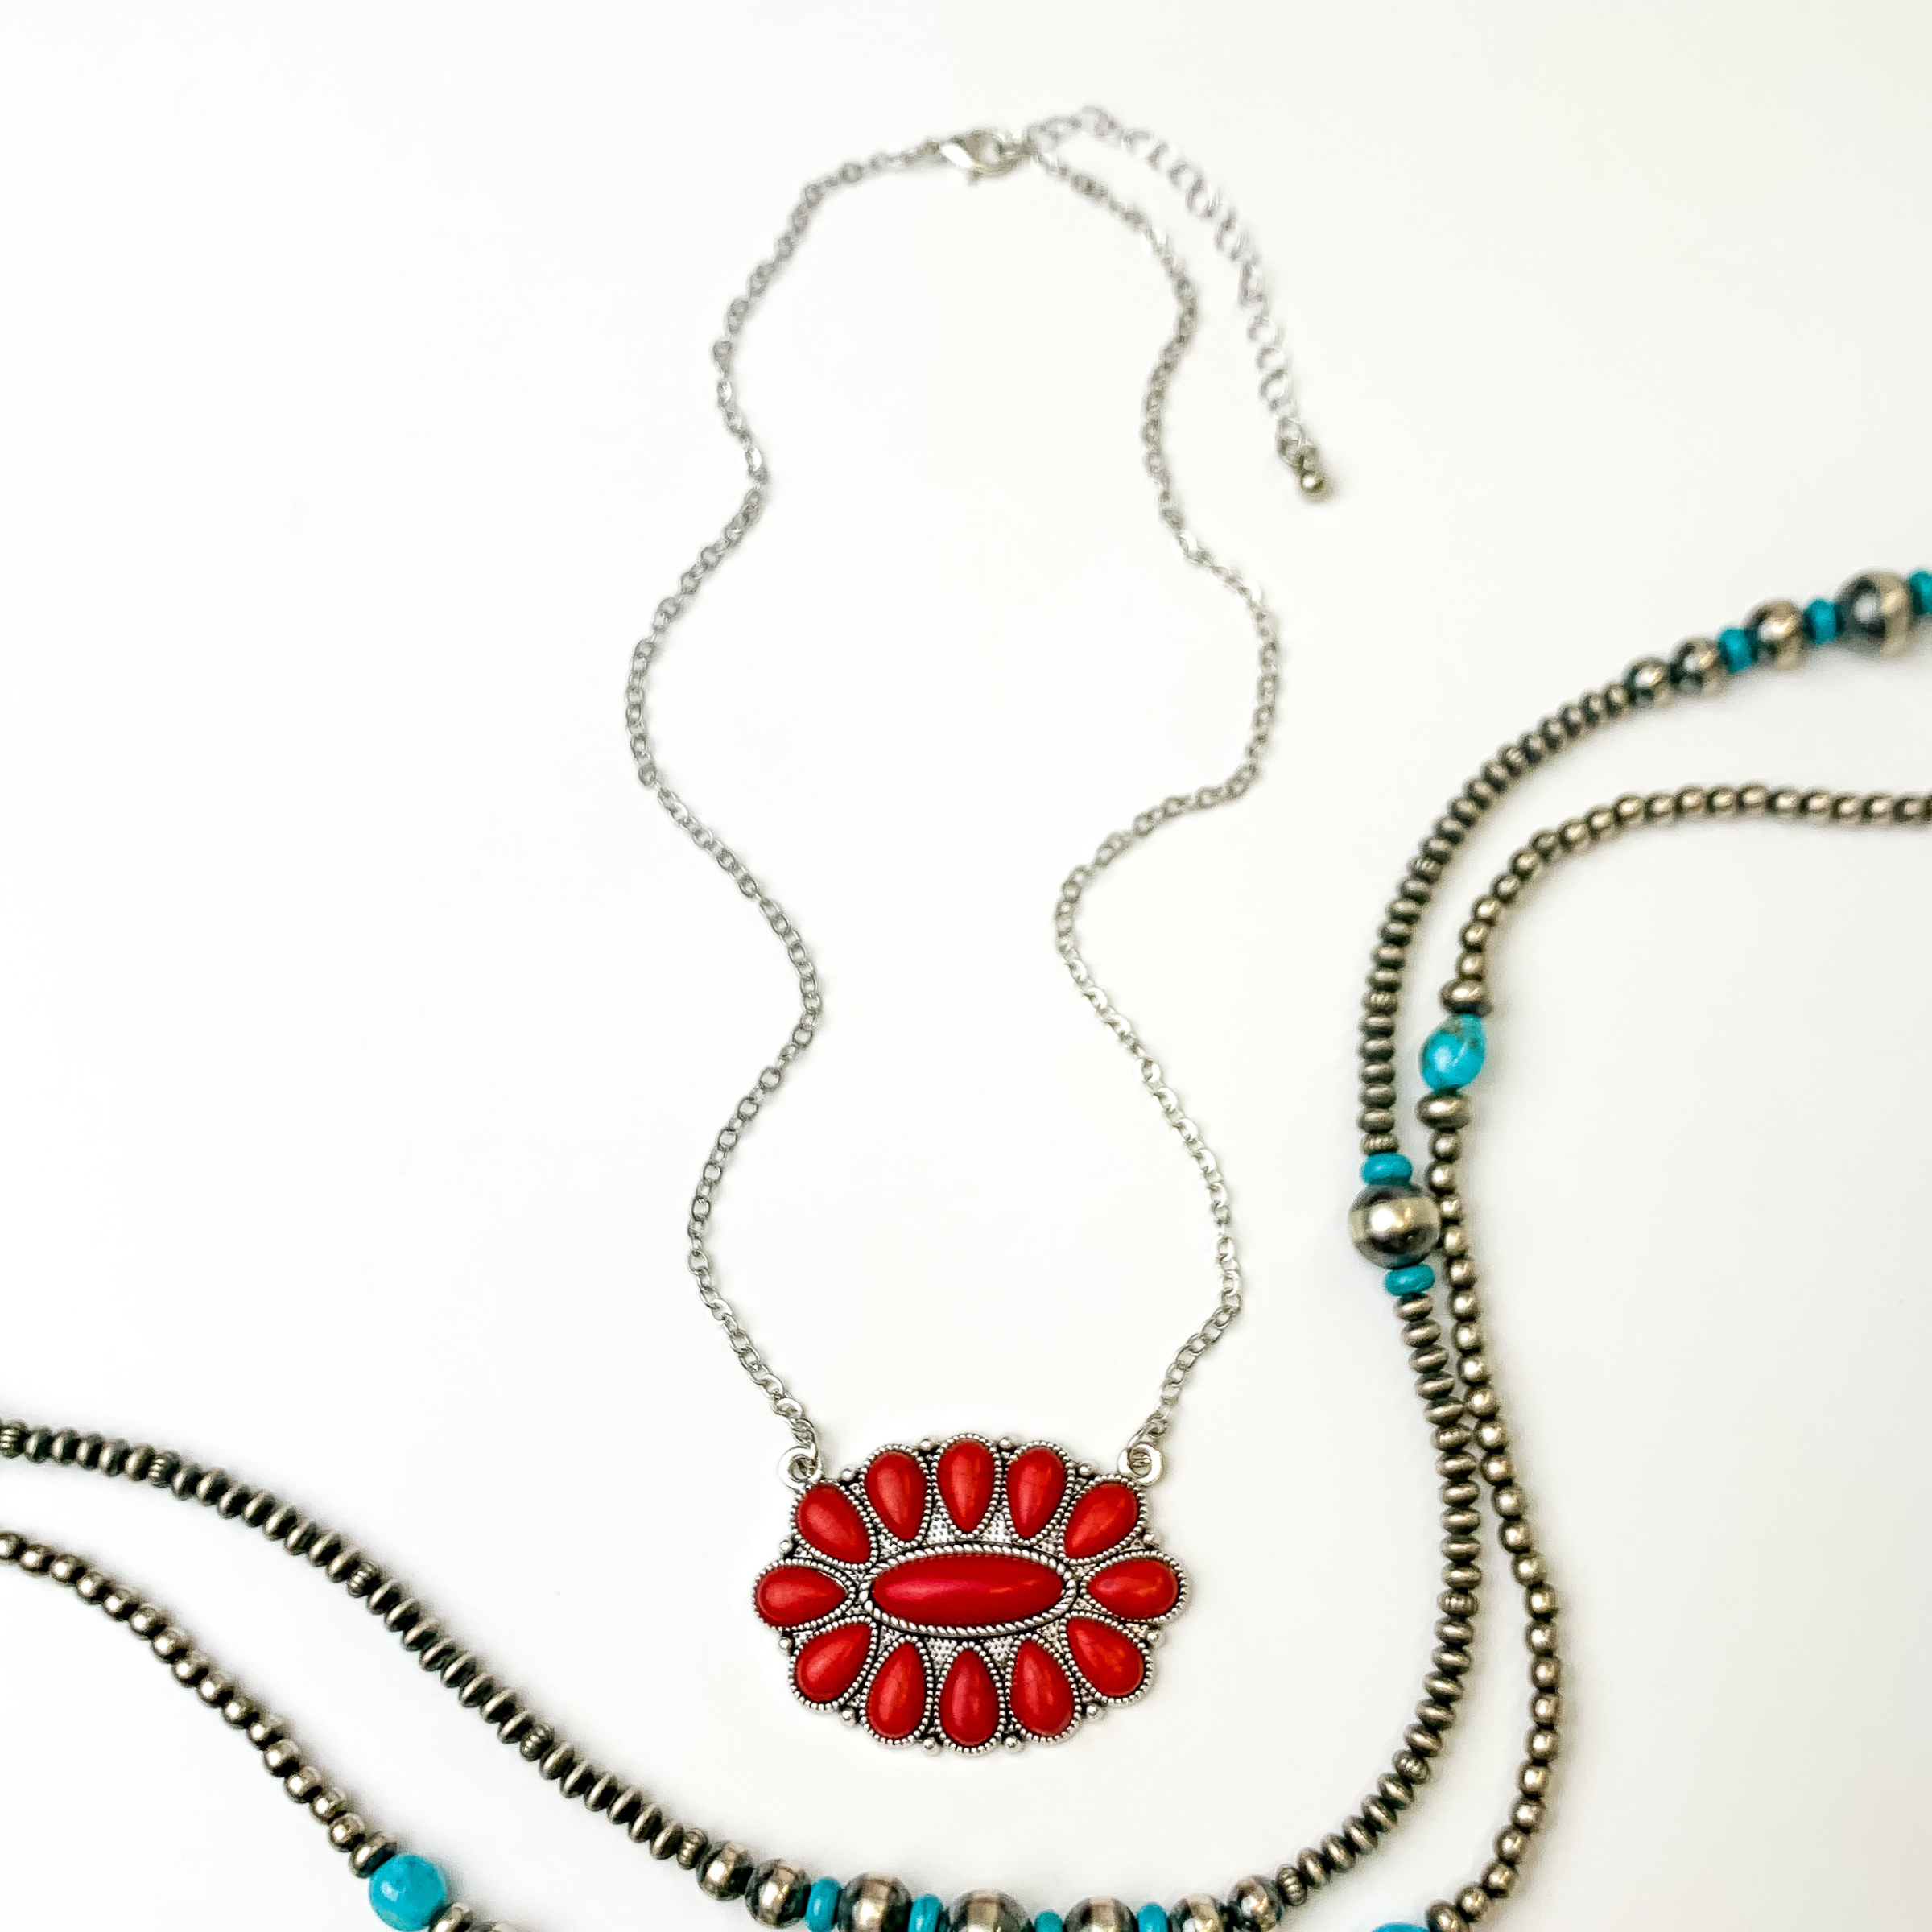 Silver chain necklace with oval cluster pendant. This pendant is made up of red stones. This necklace is pictured on an white background with silver and turquoise beads on the right side of the picture.